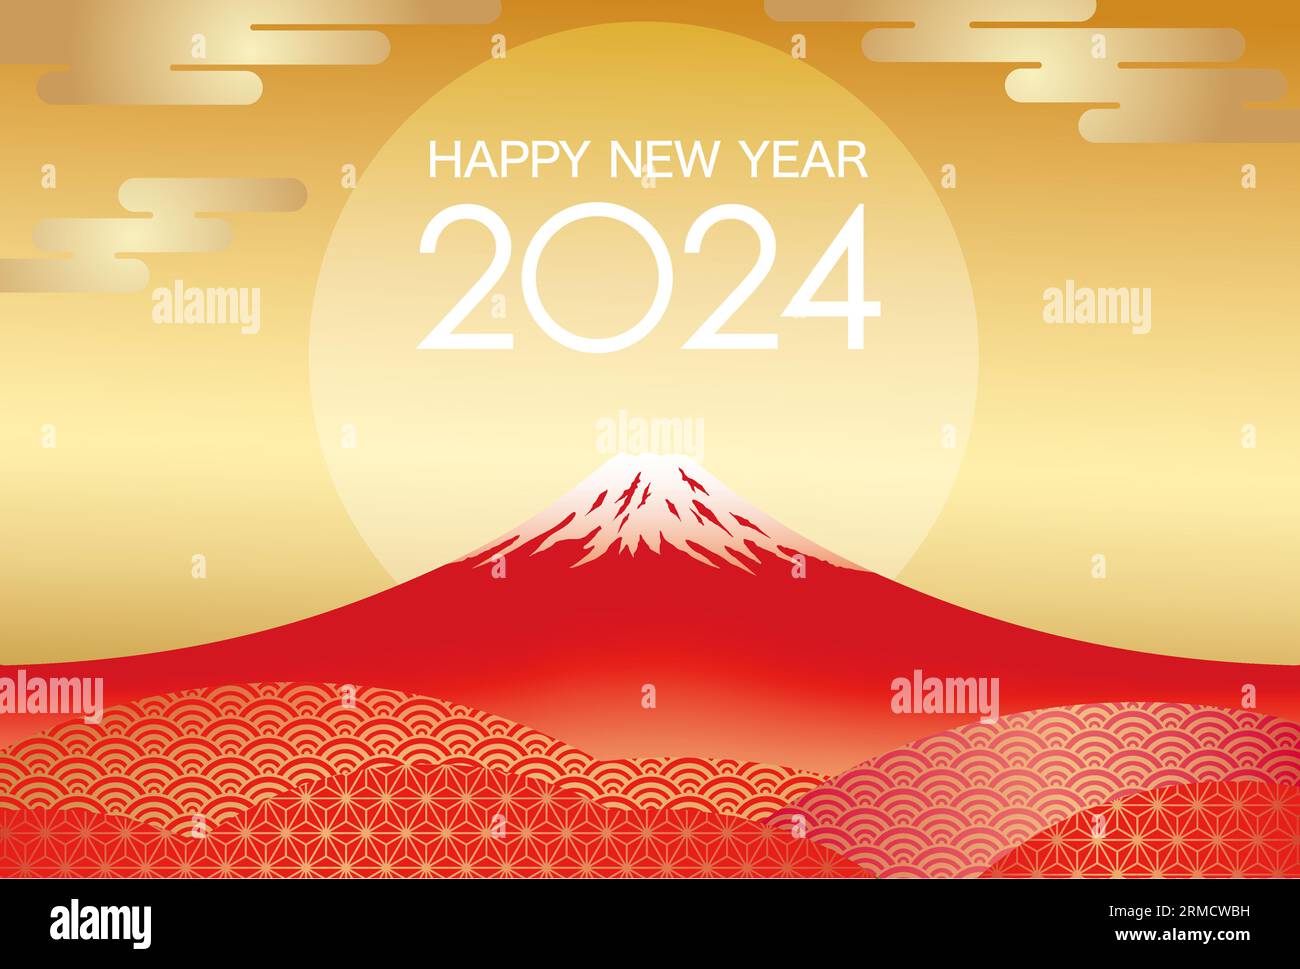 2024 New Year’s Vector Template With Red Mt. Fuji Decorated With Vintage Japanese Patterns. Stock Vector